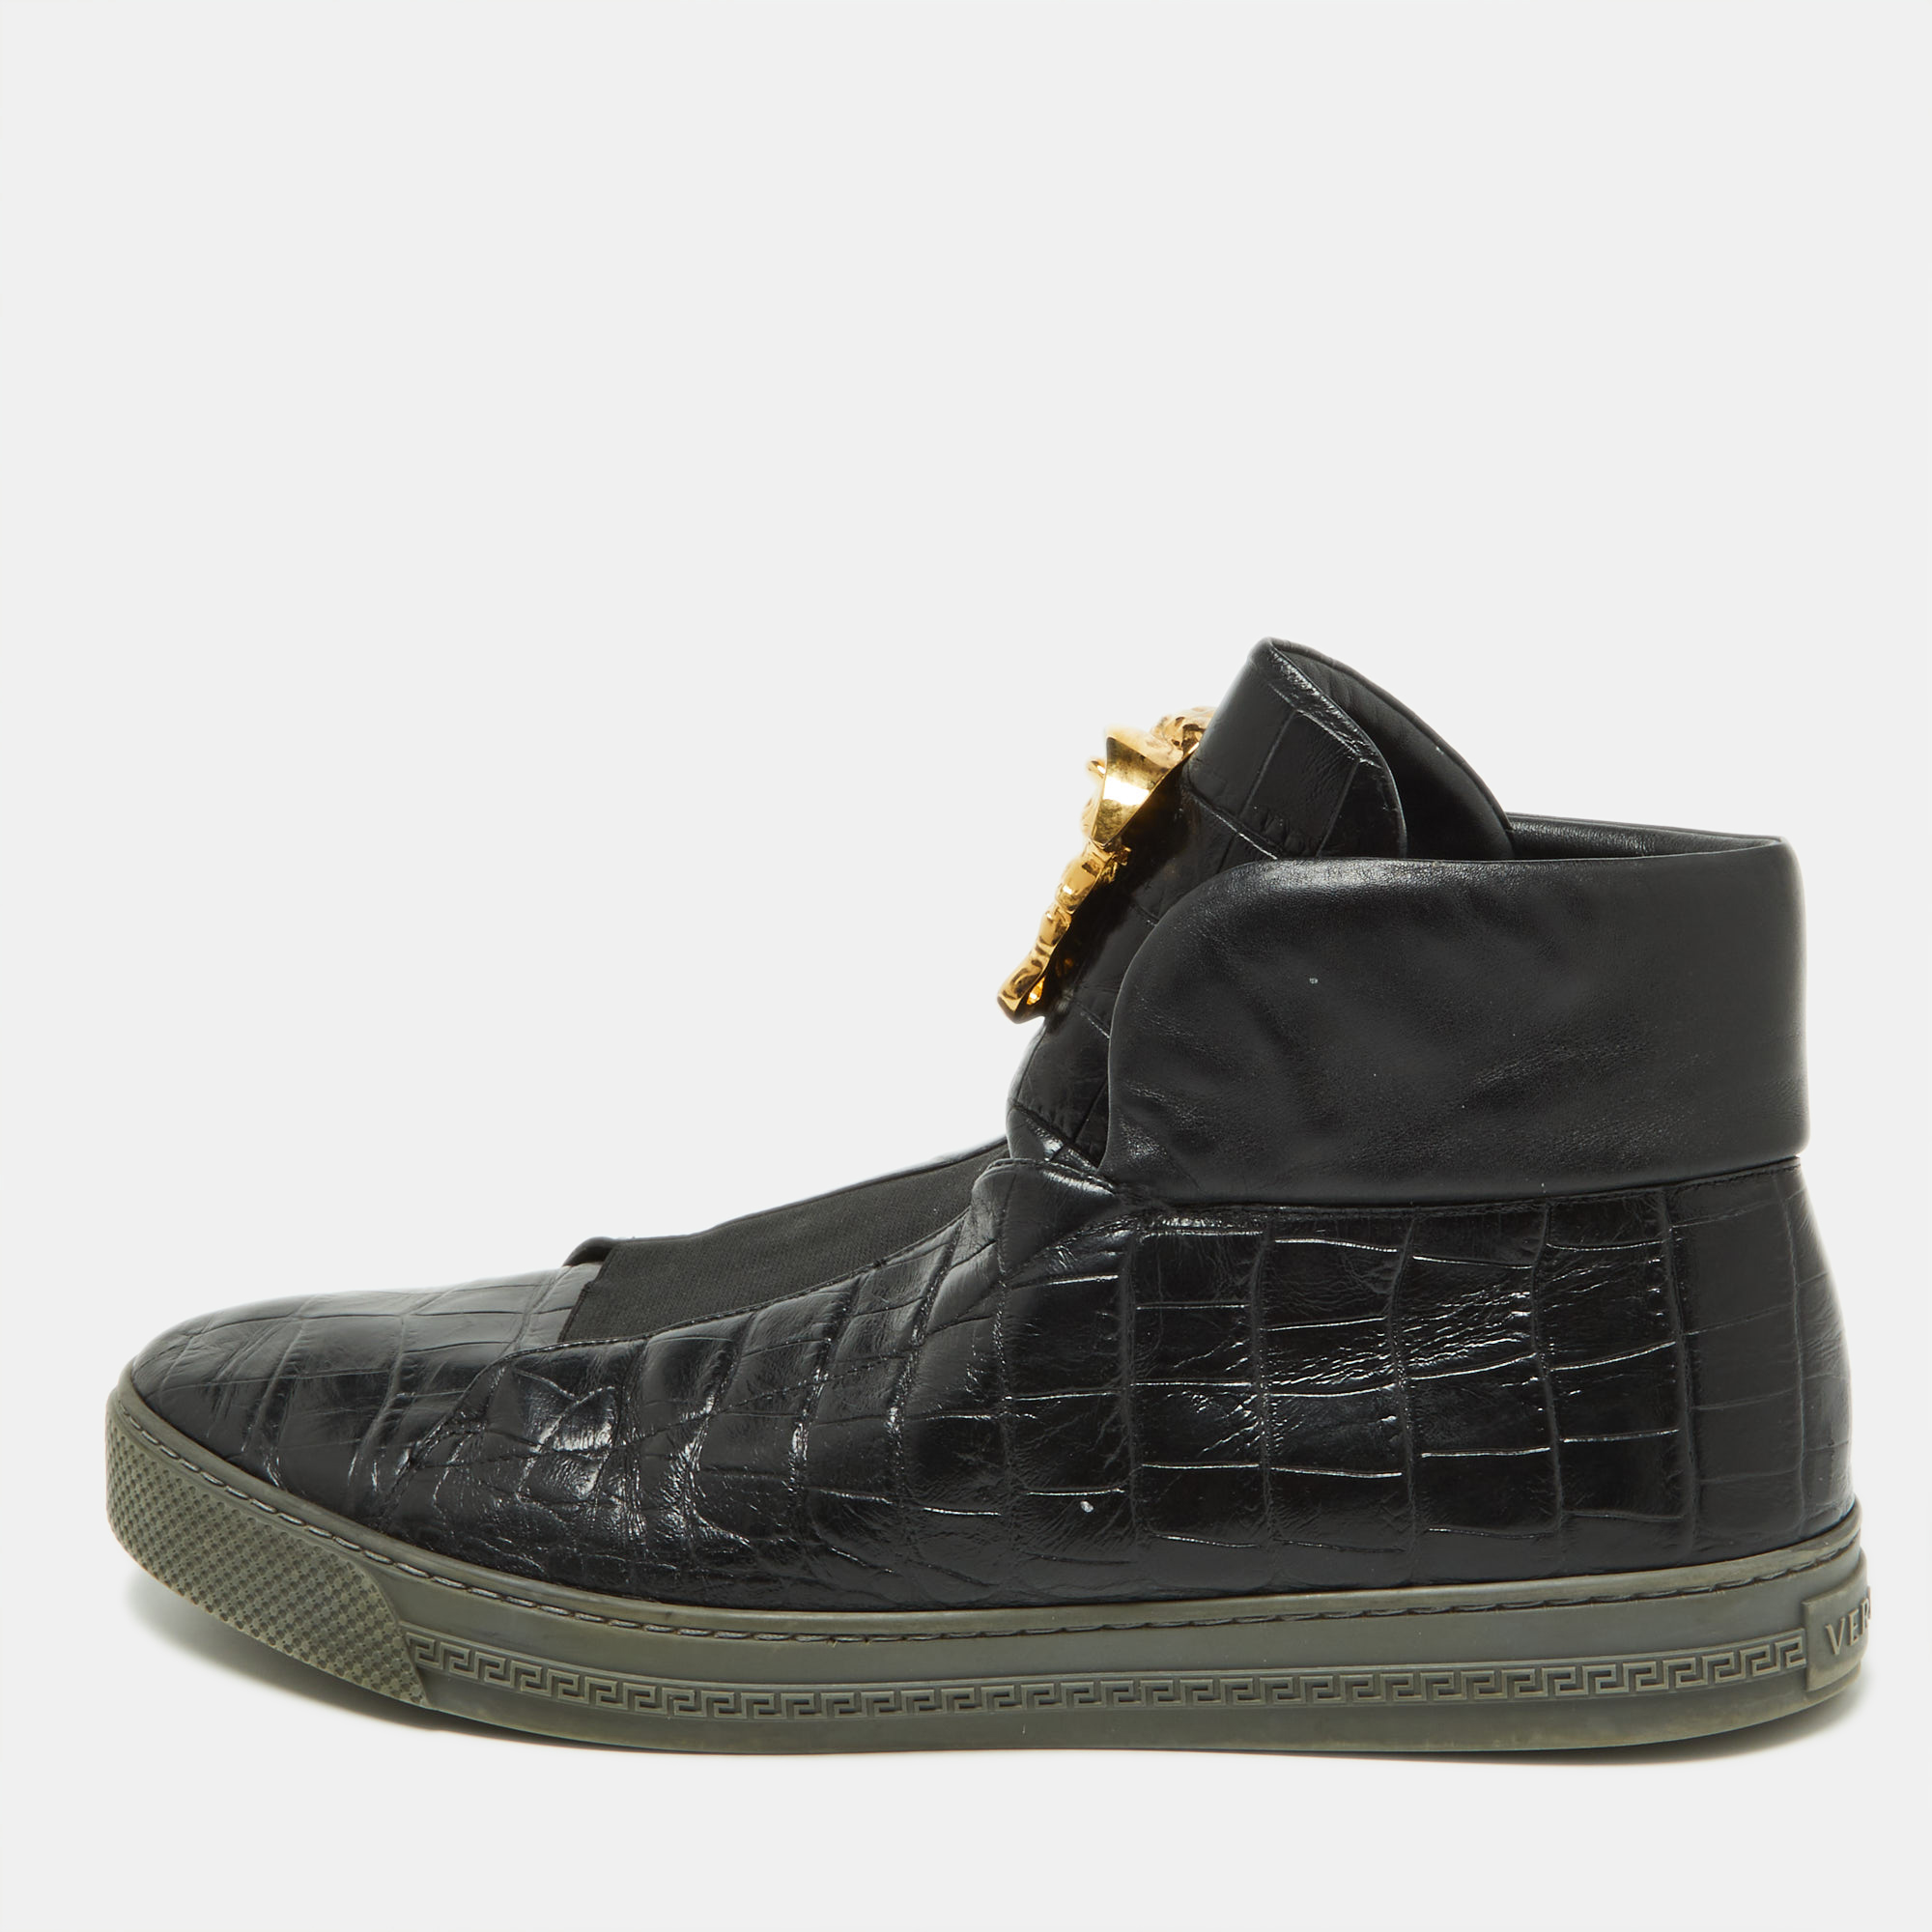 Brimming with fabulous details these Versace sneakers are crafted from croc embossed leather into a high top silhouette and feature the Medusa logo. The fine construction and trendy appeal make these sneakers a must buy.